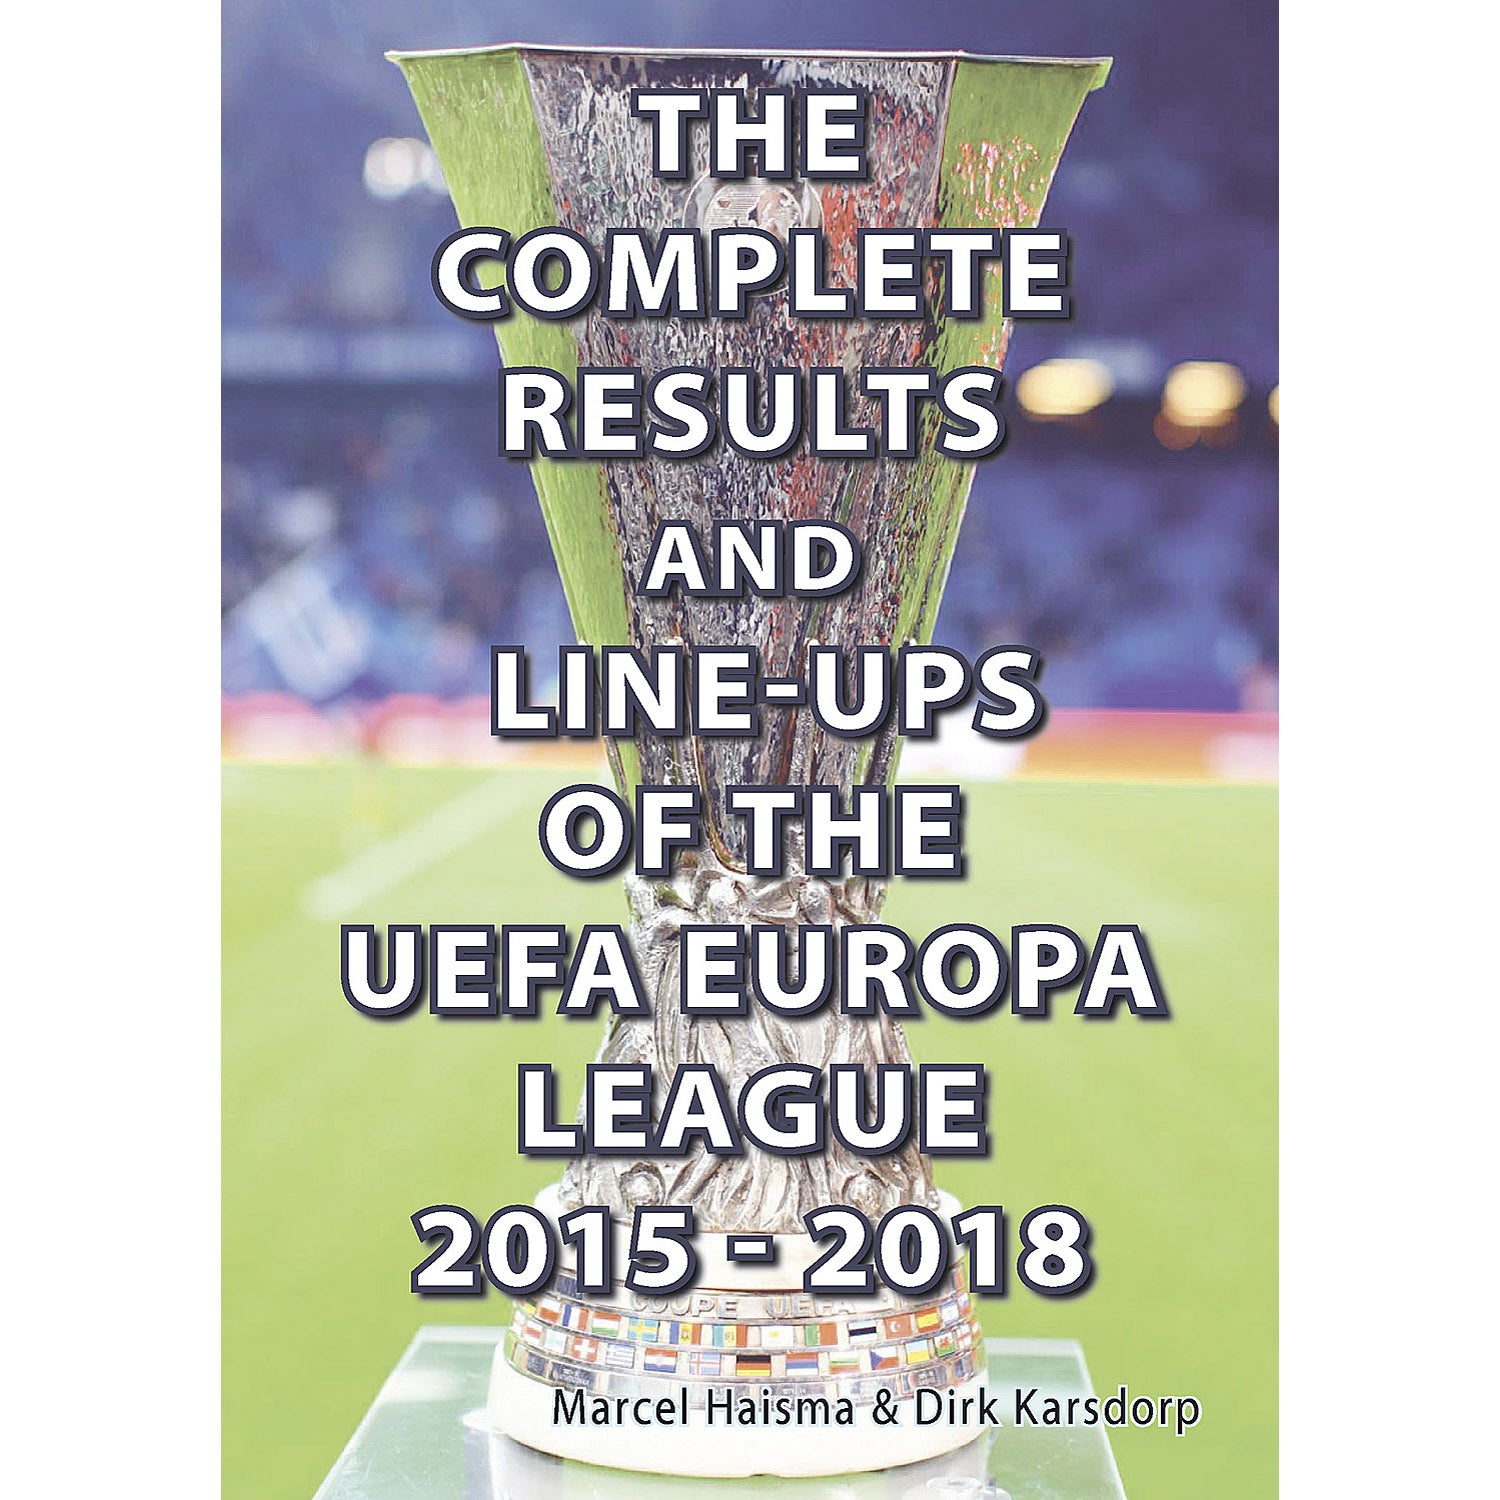 The Complete Results and Line-ups of the UEFA Europa League 2015-2018